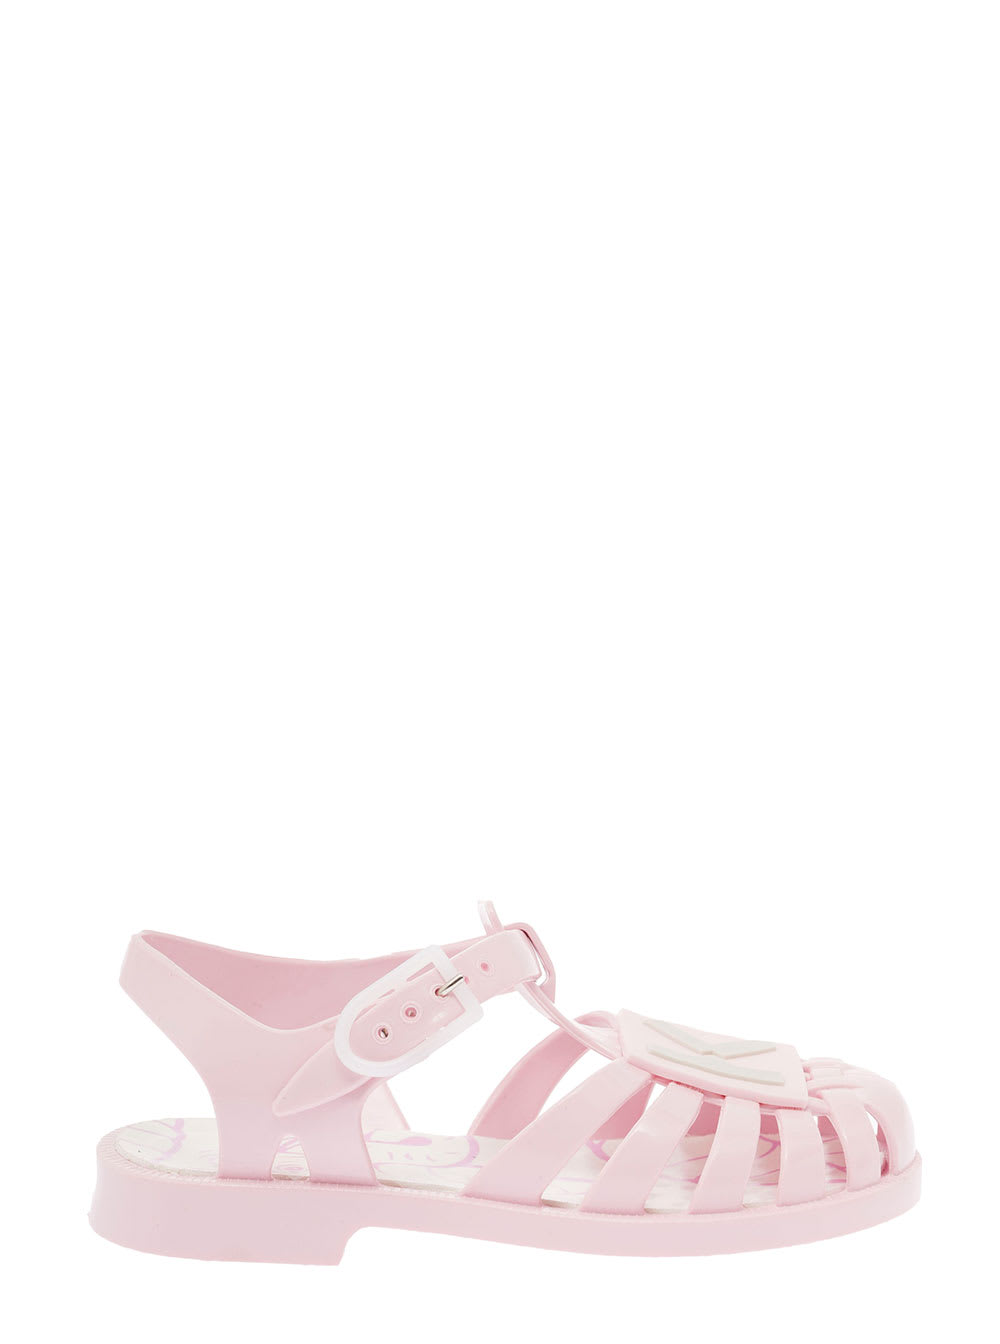 Kenzo Kids Kenzo Girls Pink Rubber Sandals With Logo